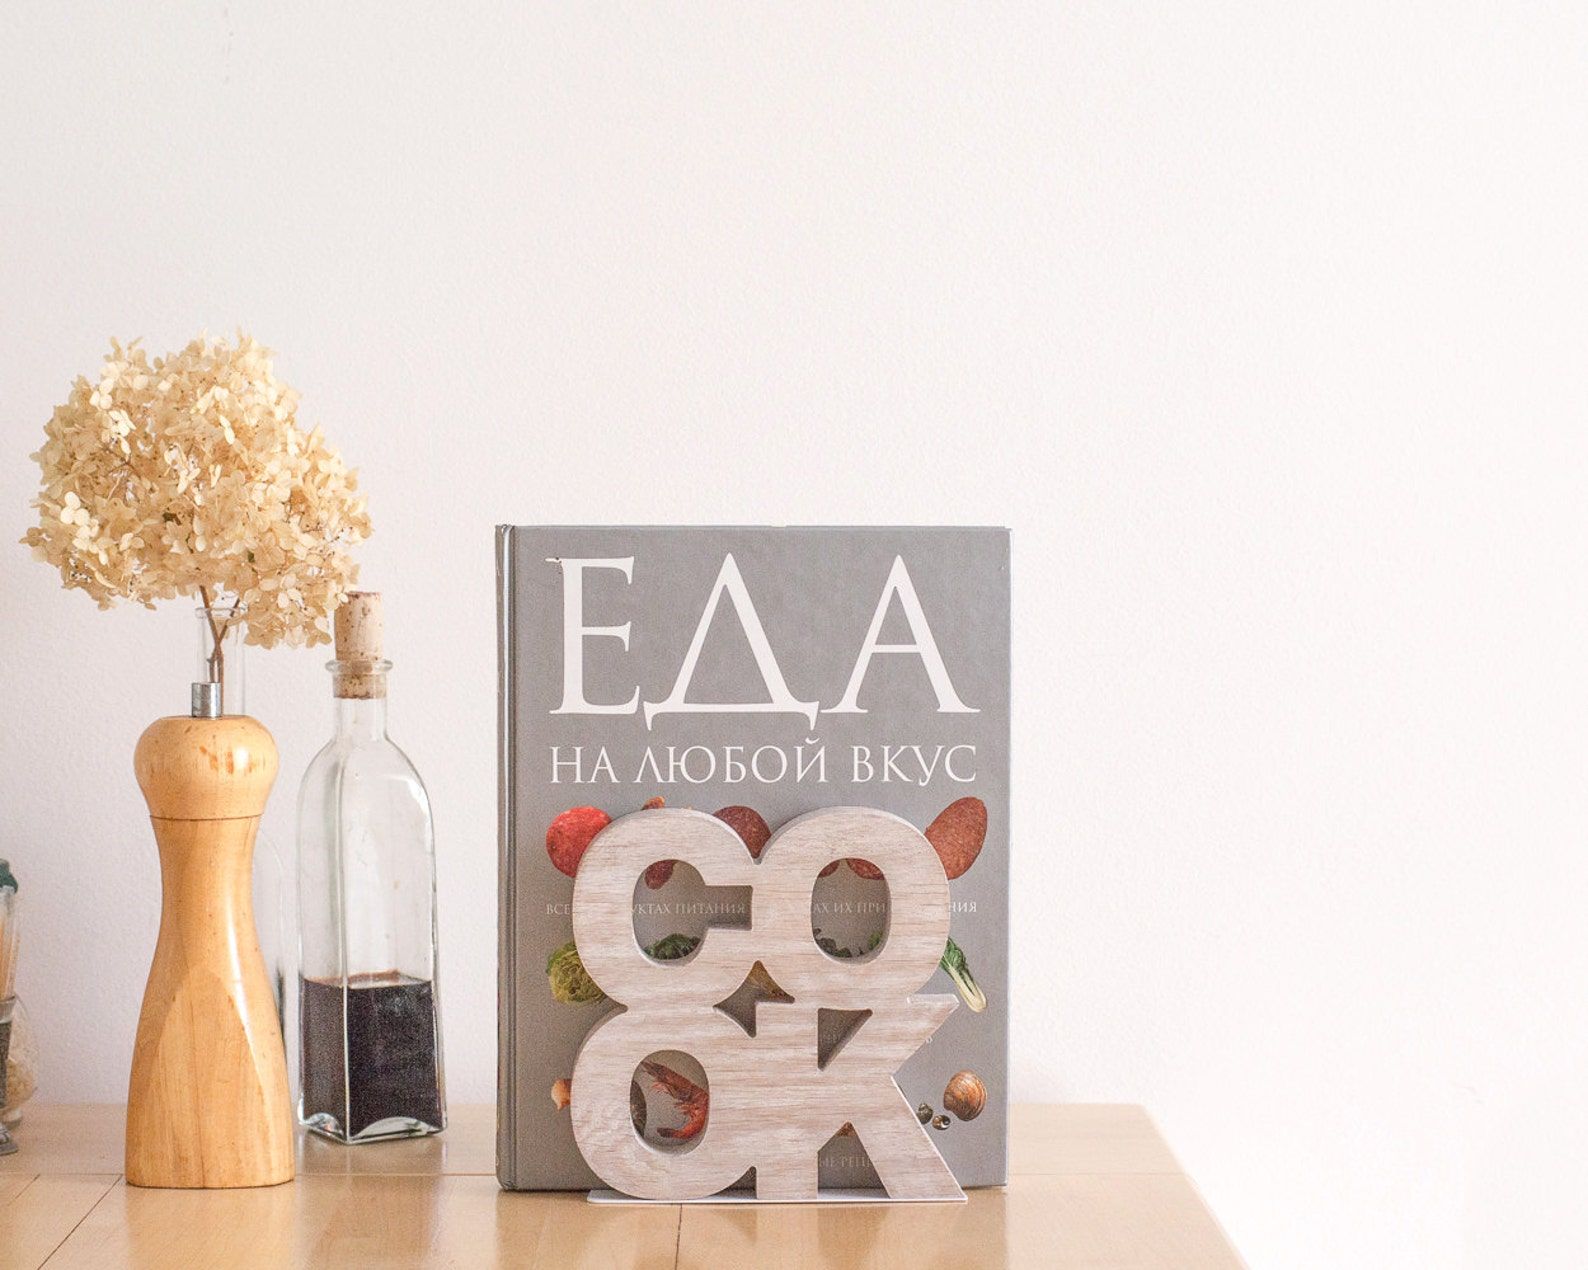 A wooden bookend with large letters that spell "Cook" laid out in a square. It's holding up a cookbook and there is a pepper grinder next to it.